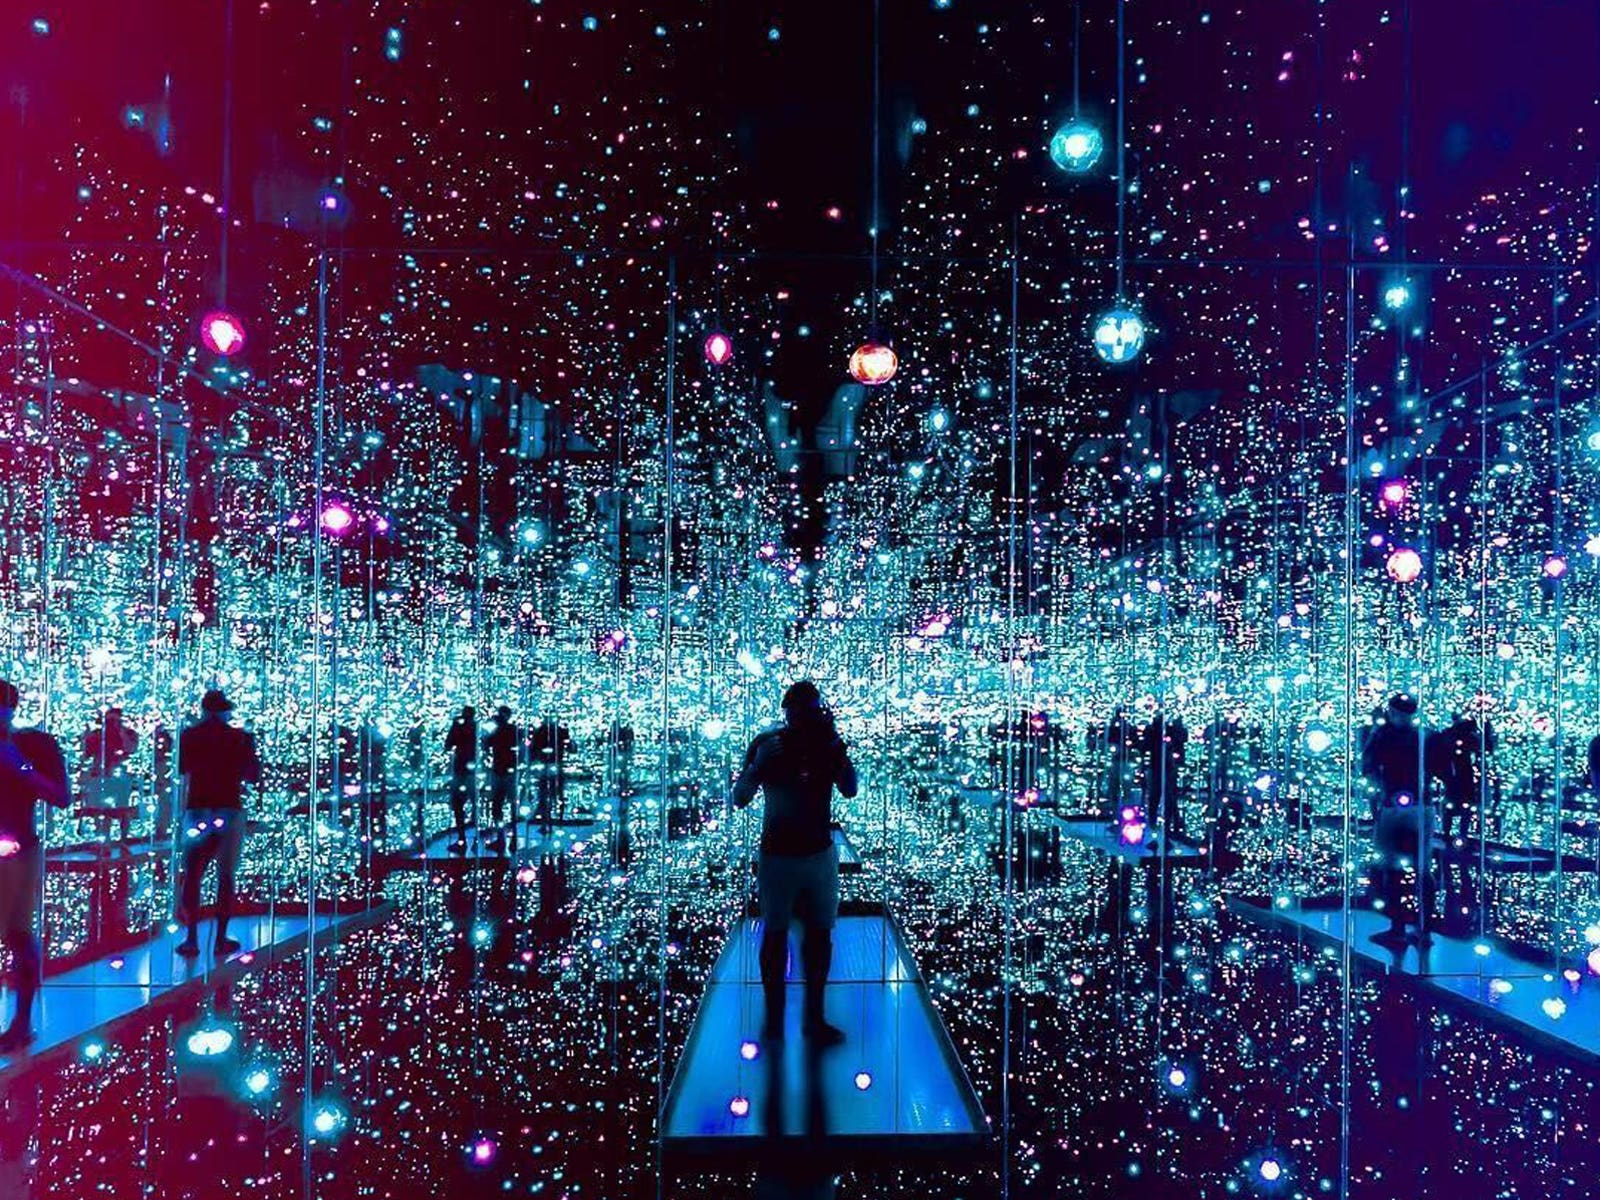 "Infinity Mirrored Room - The Souls of Millions of Light Years Away" by Yayoi Kusama at The Broad